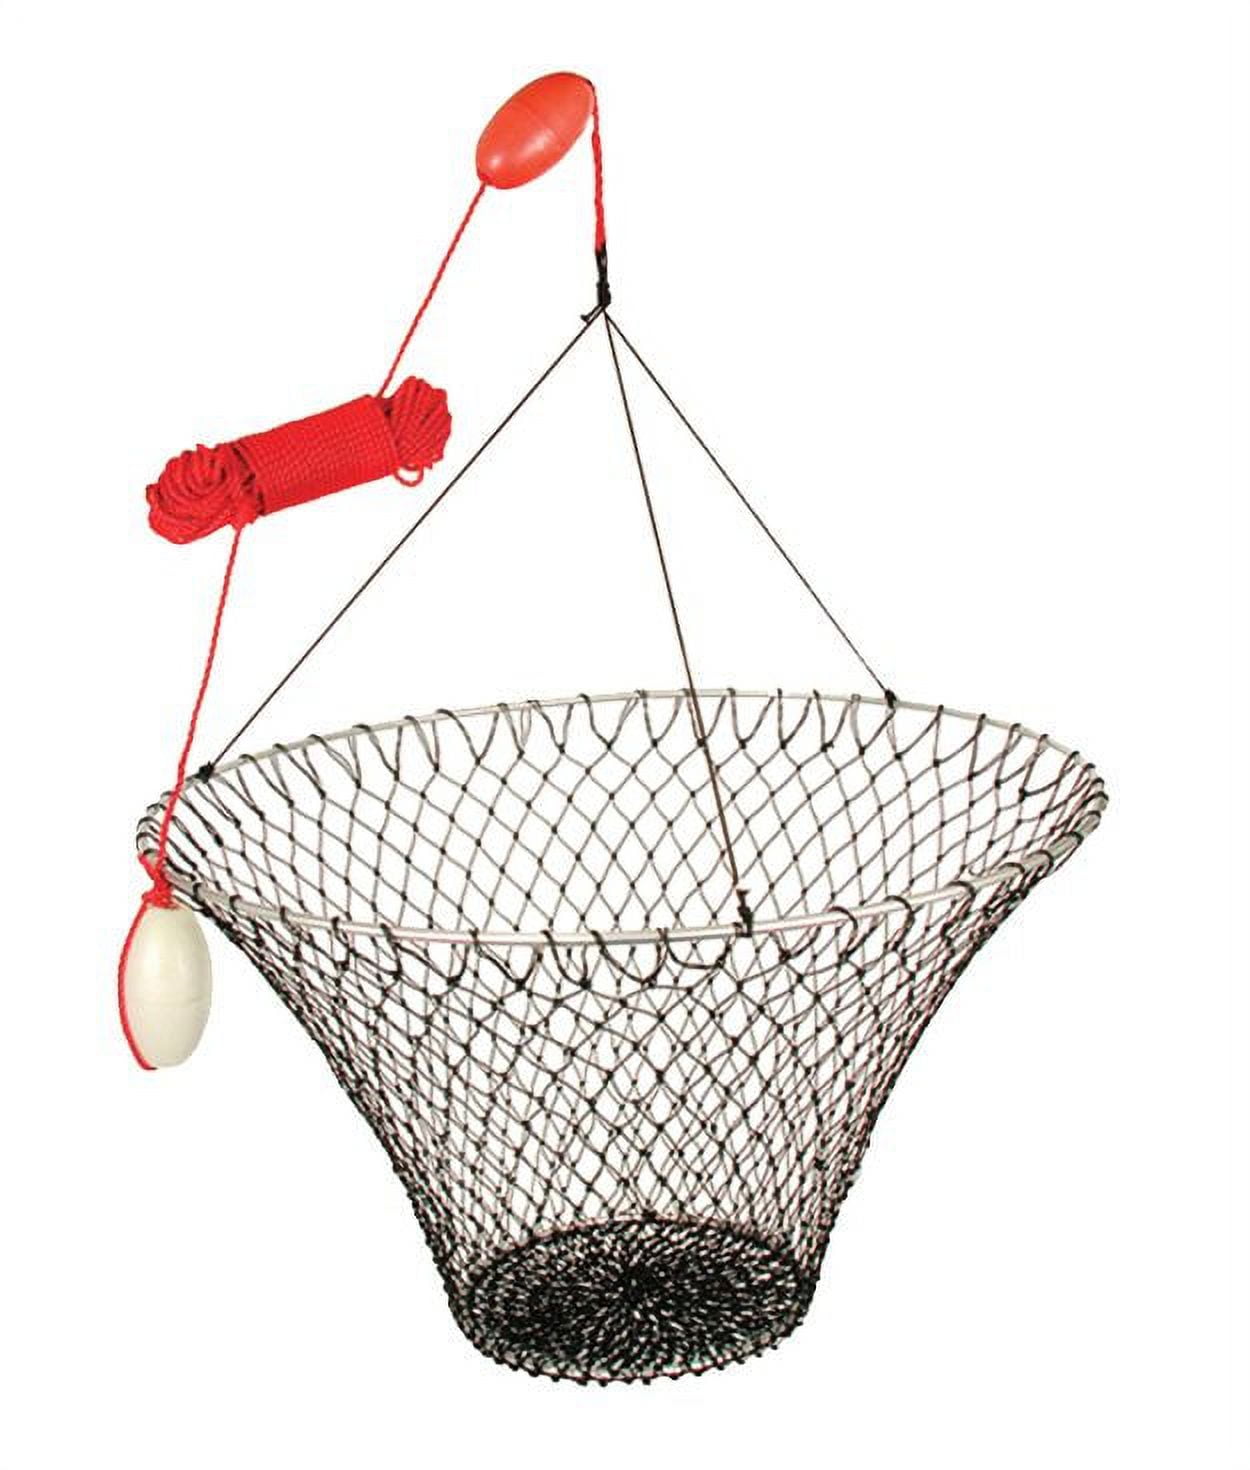 Promar 32 Deluxe Lobster and Crab Fishing Net 